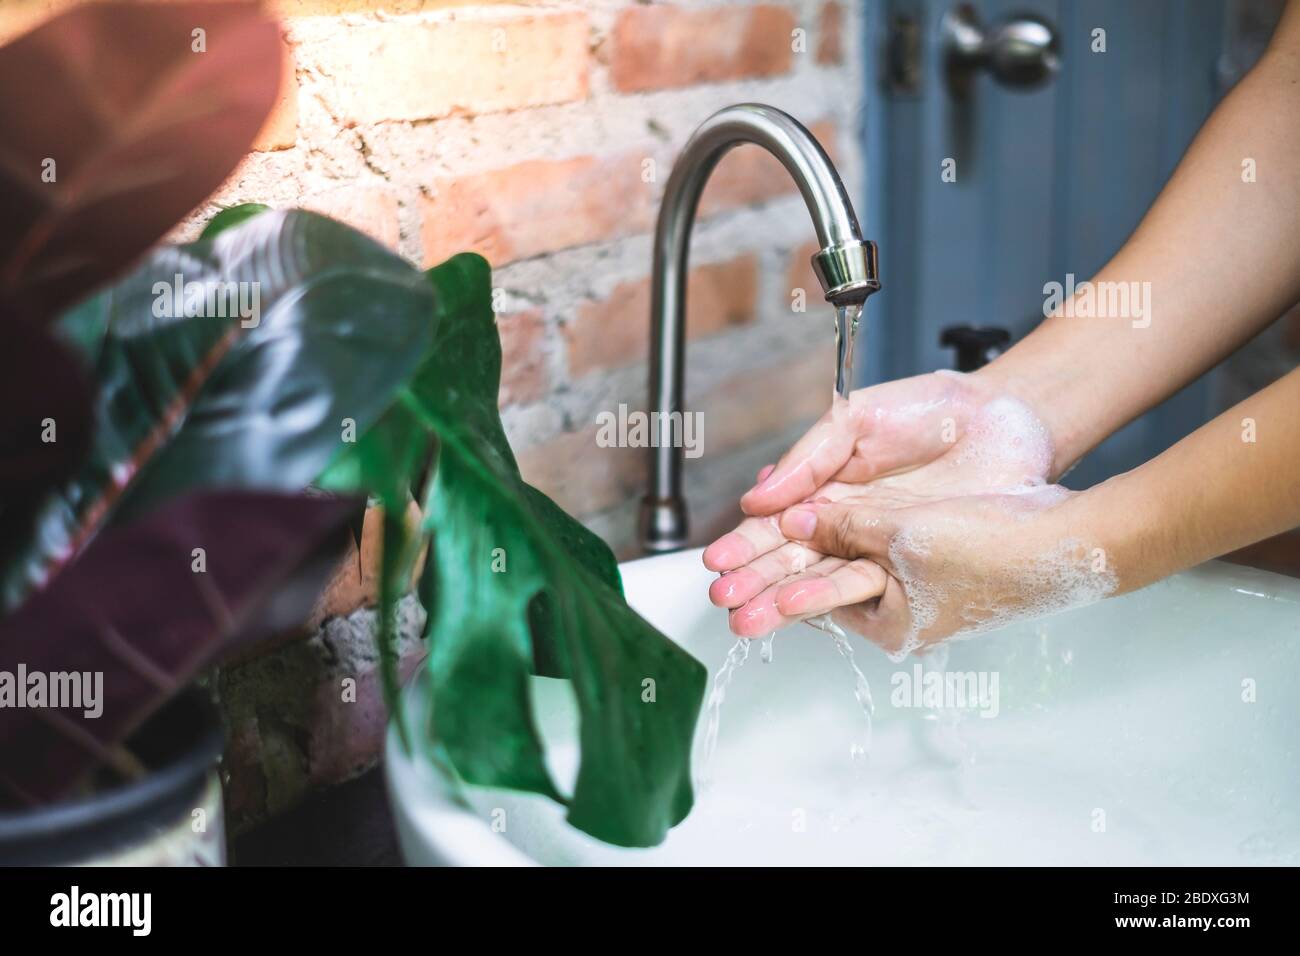 Rinse hands under running water. Washing hands is the most effective ways to prevent the spread of germs. Stock Photo